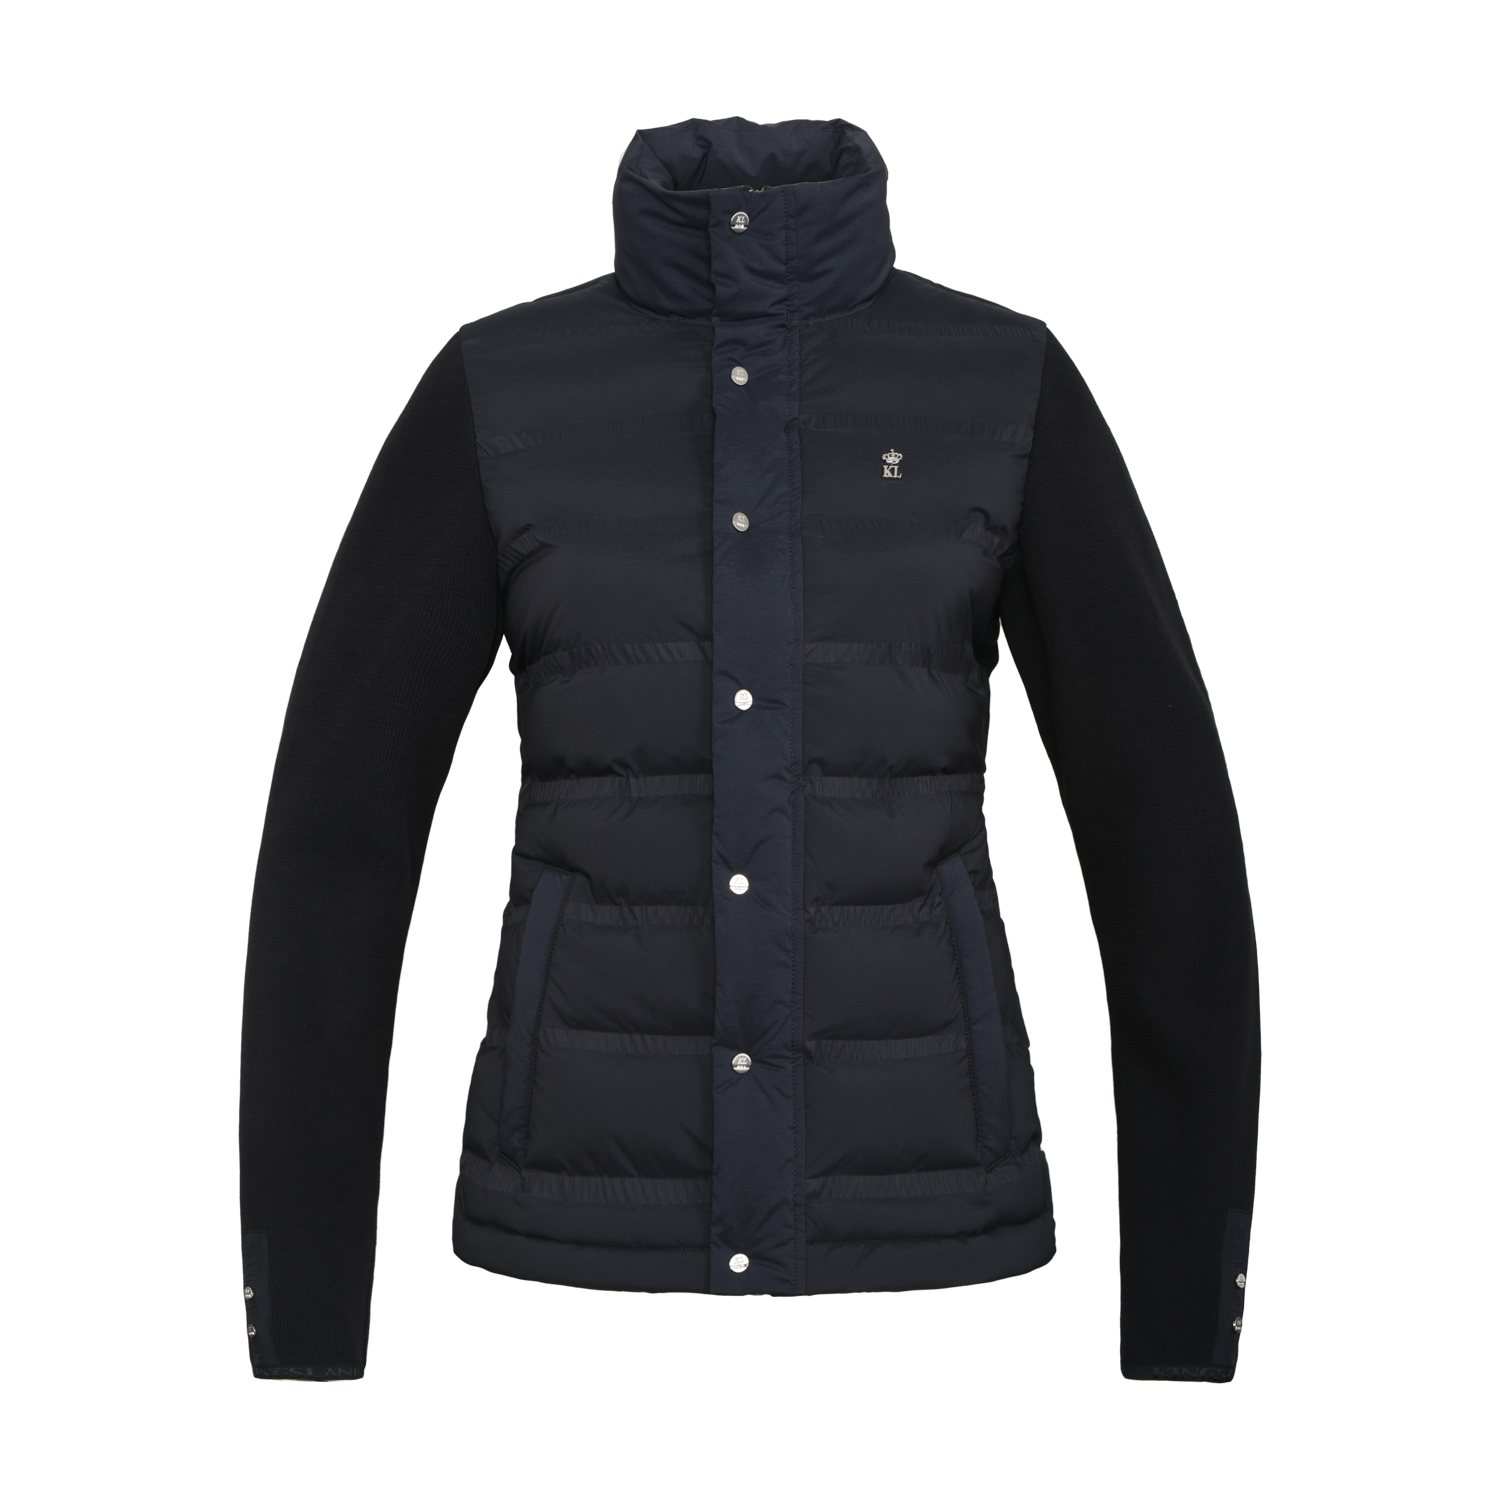 Kingsland Equestrian Riding Belle Ladies Insulated Jacket navy